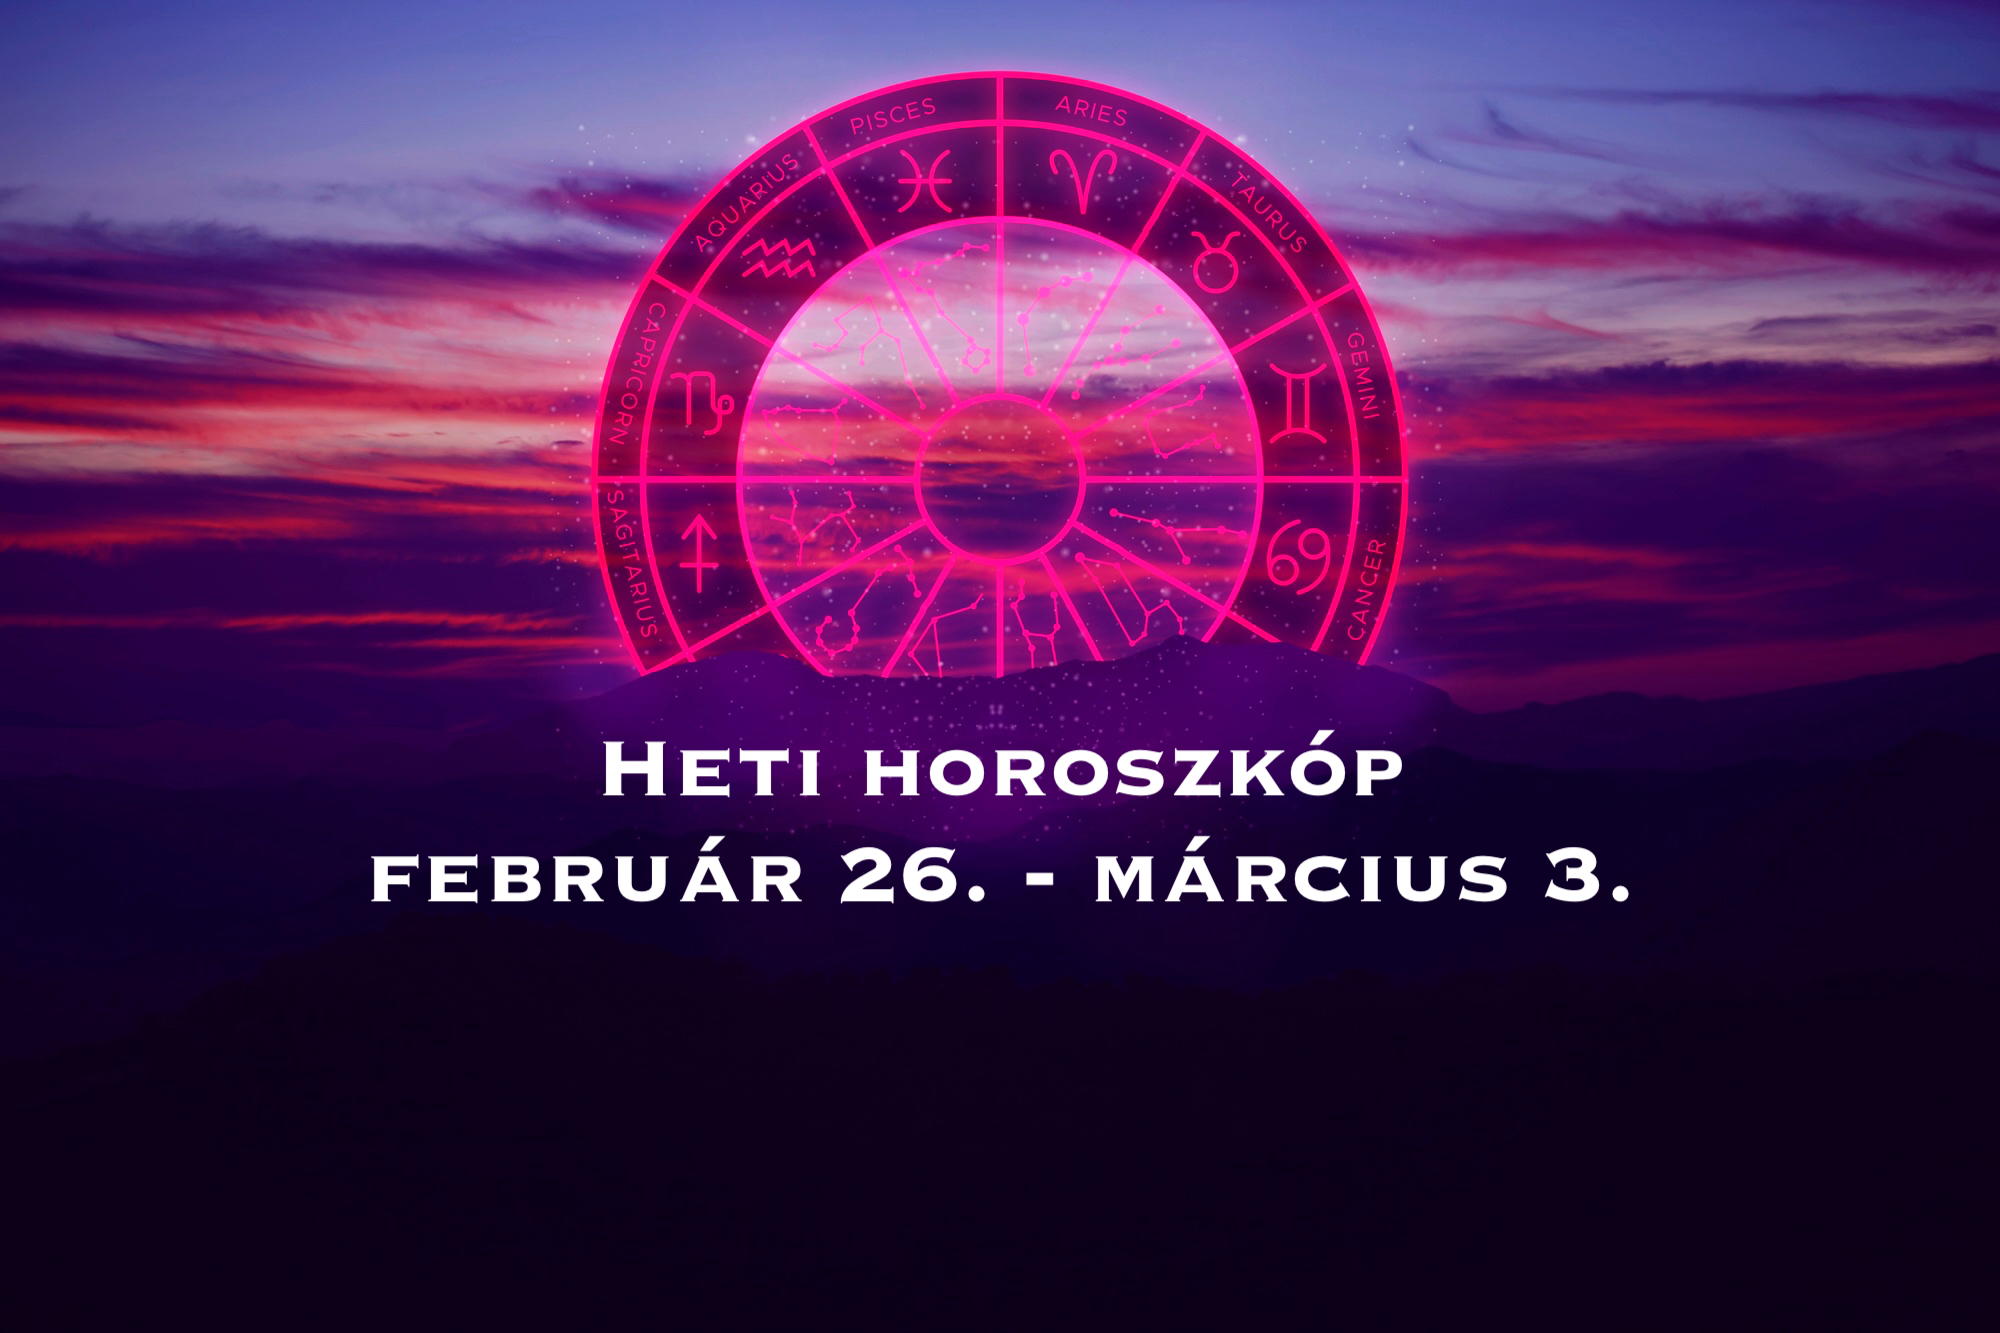 Weekly Horoscopes: These four signs may face sudden changes in work and love